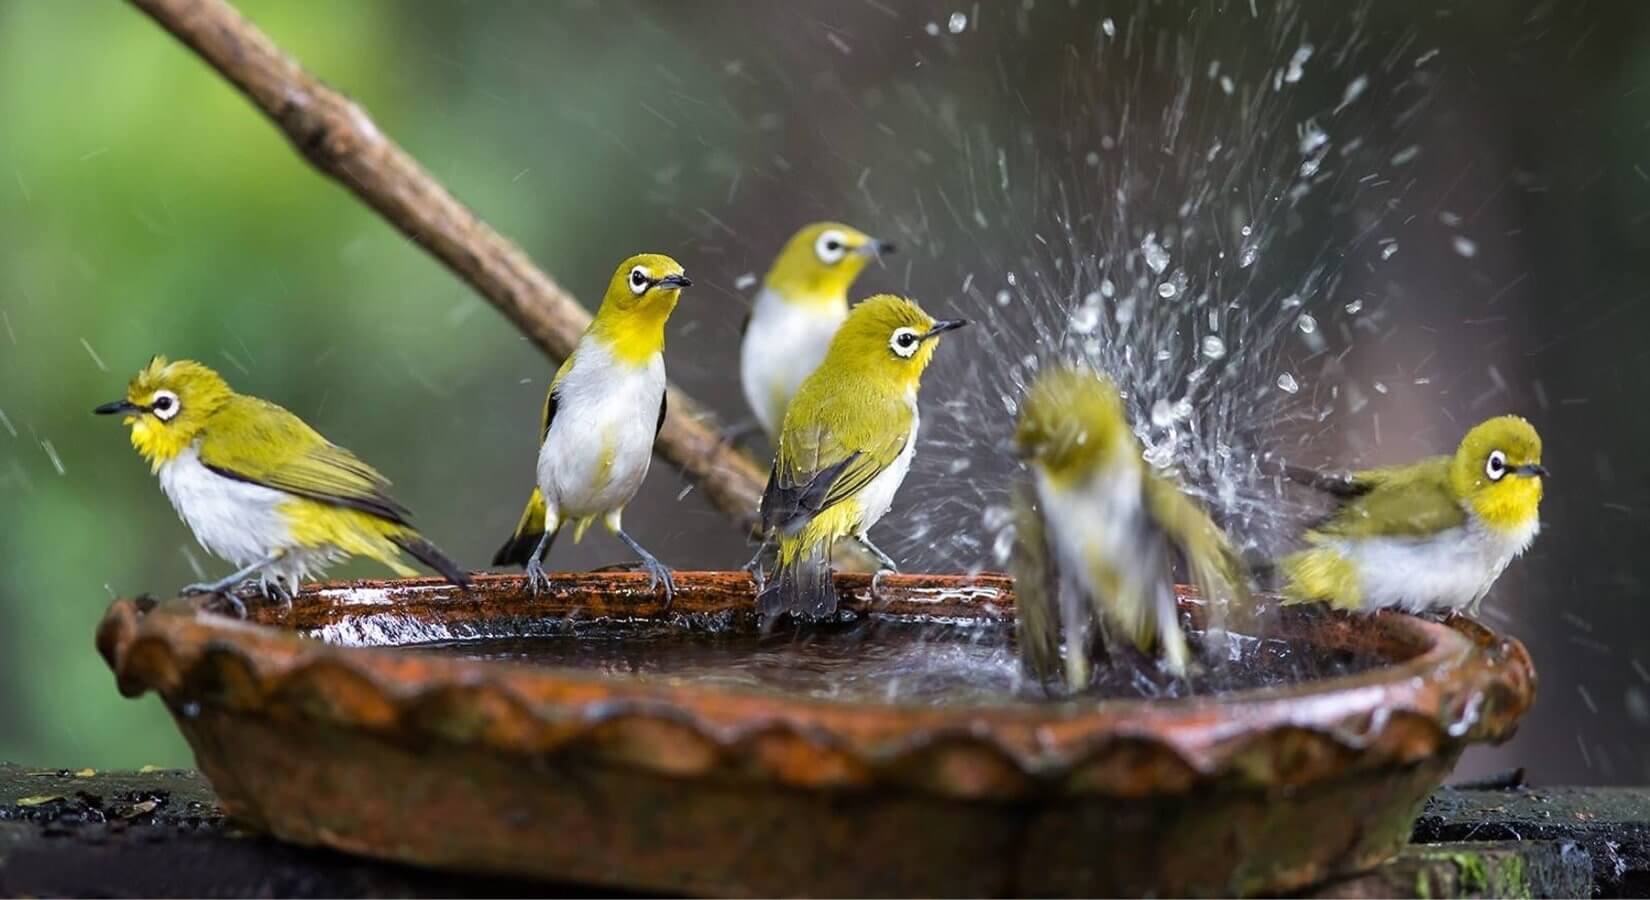 A group of birds perched in a bird bath.